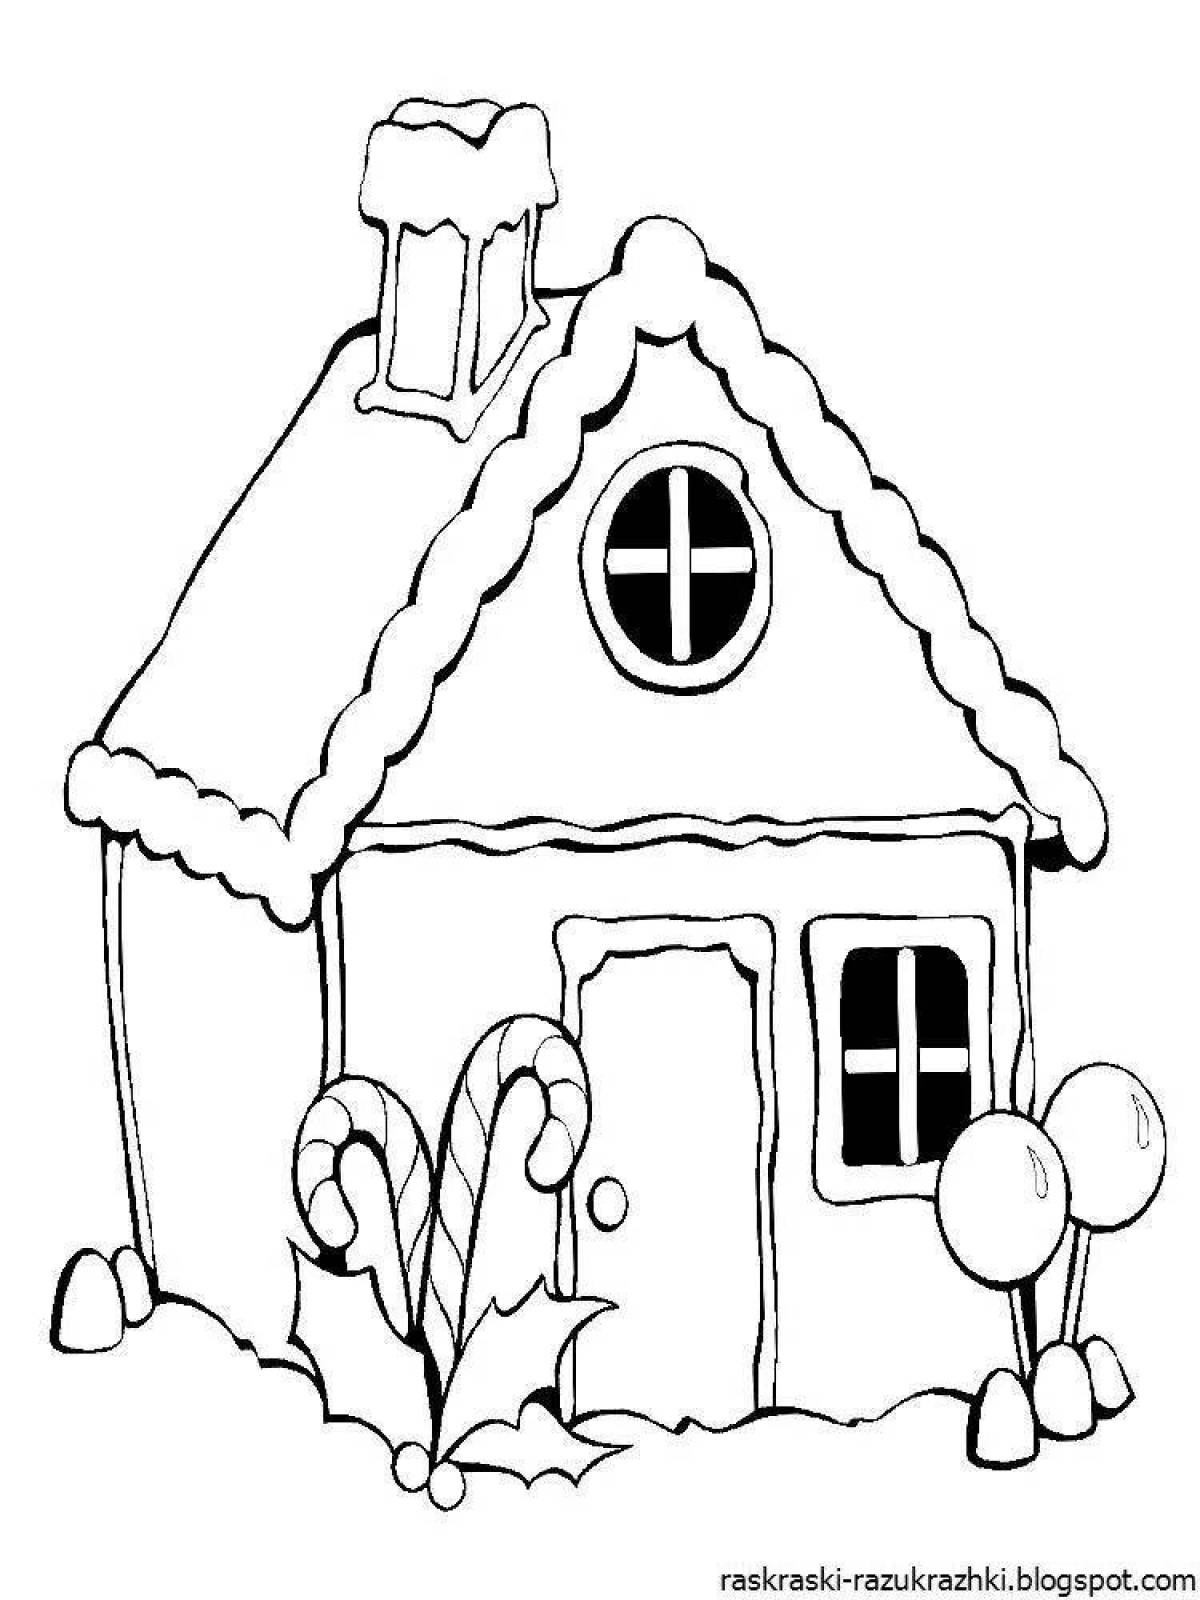 Coloring bright house for children